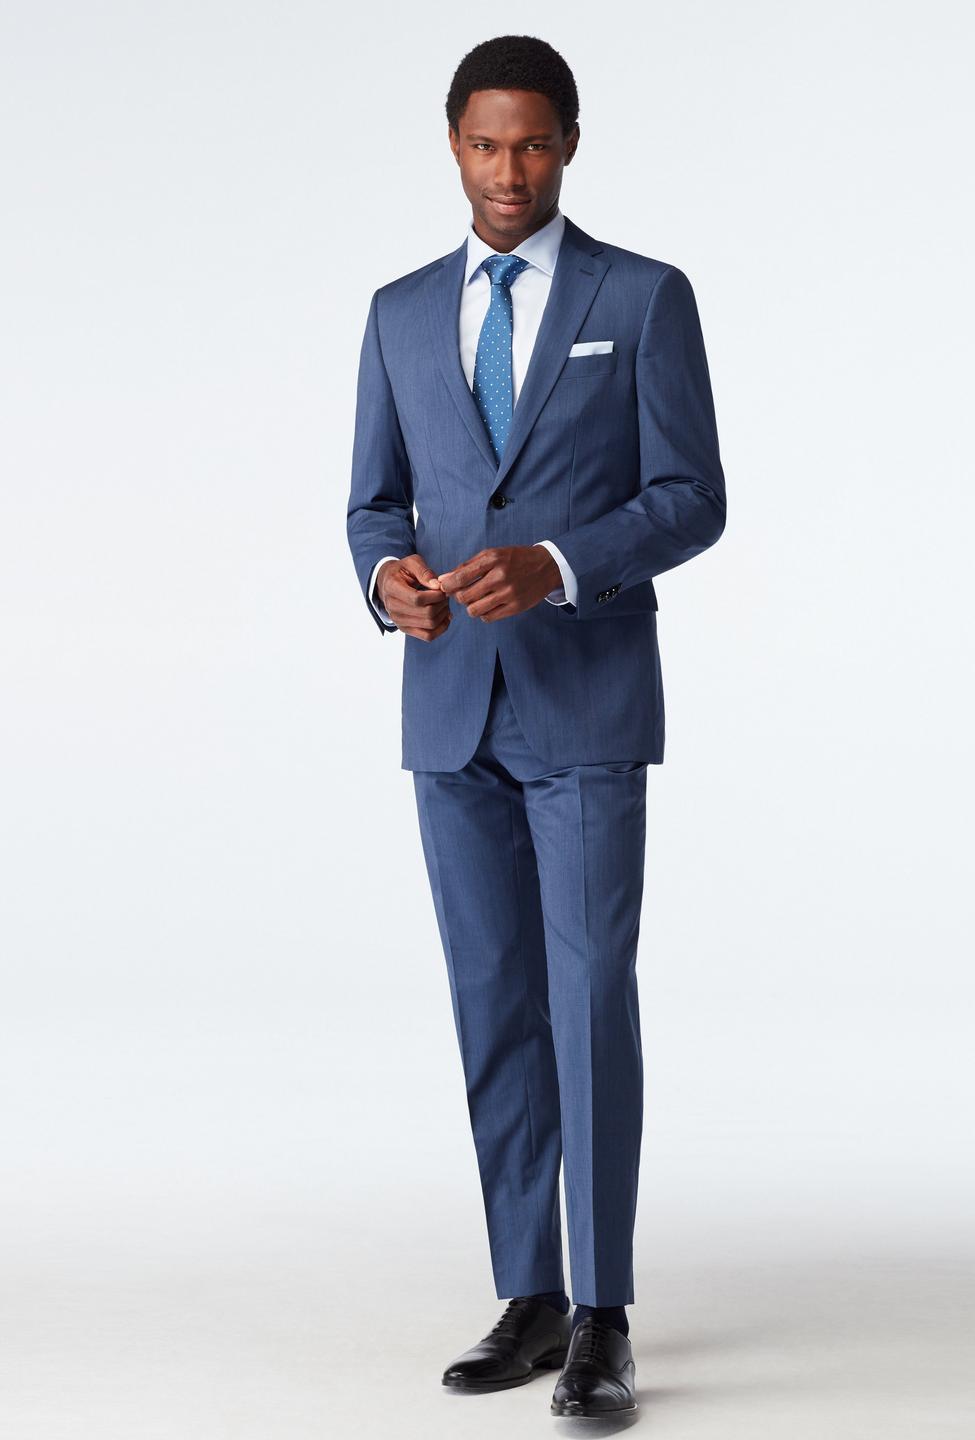 kandidat Intensiv forsikring Howell Wool Stretch Blue Suit